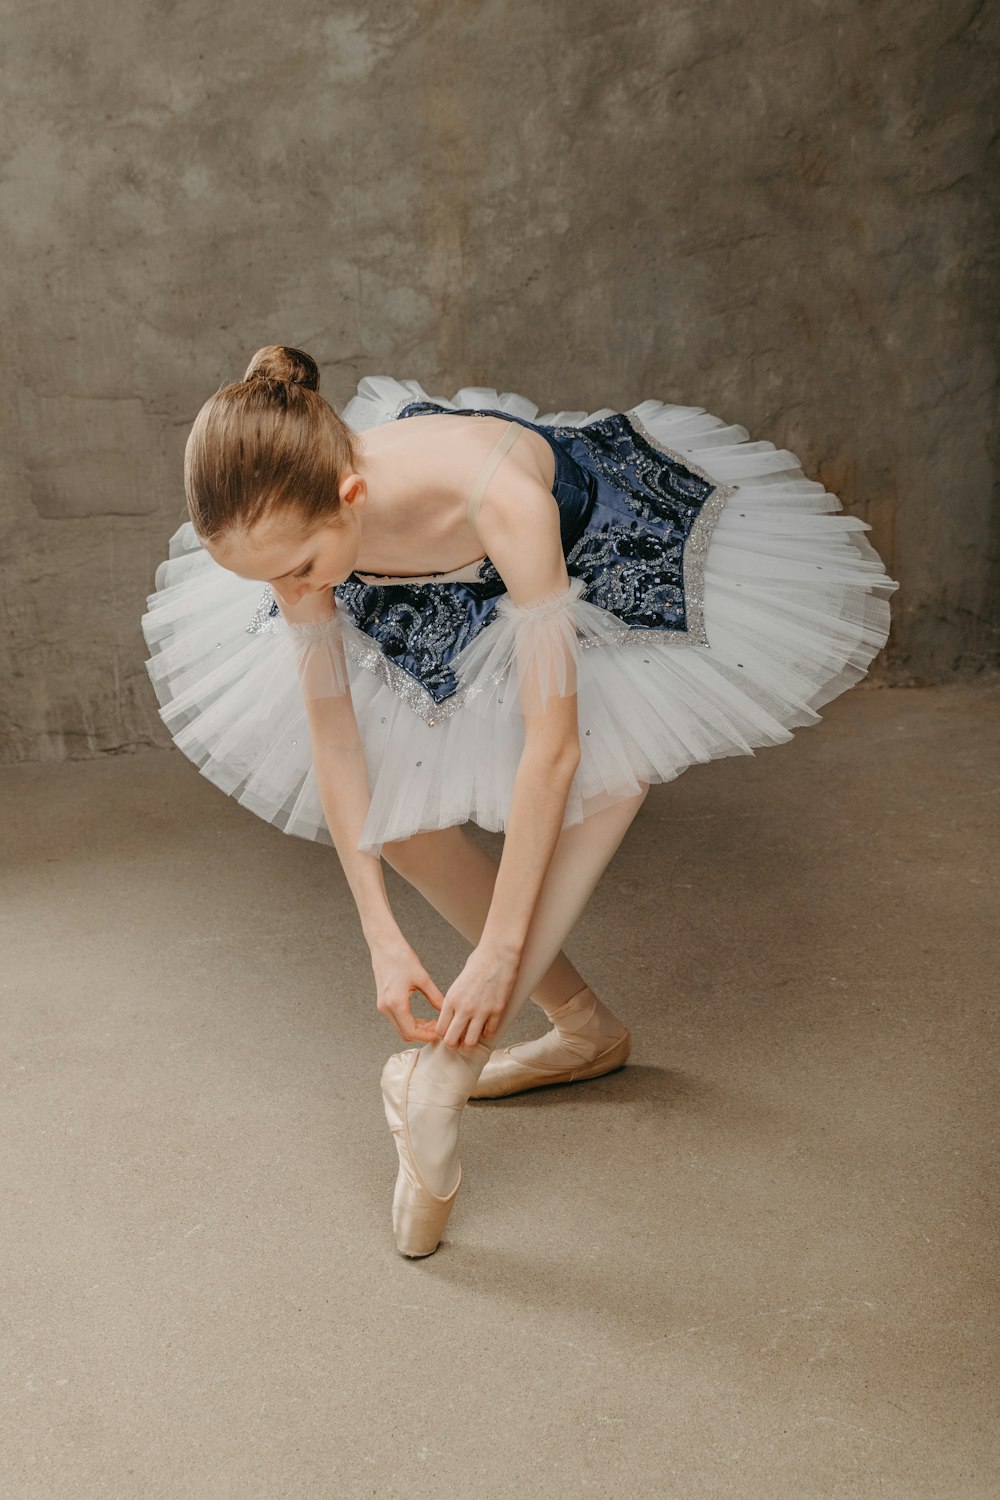 a woman in a white tutu and ballet shoes